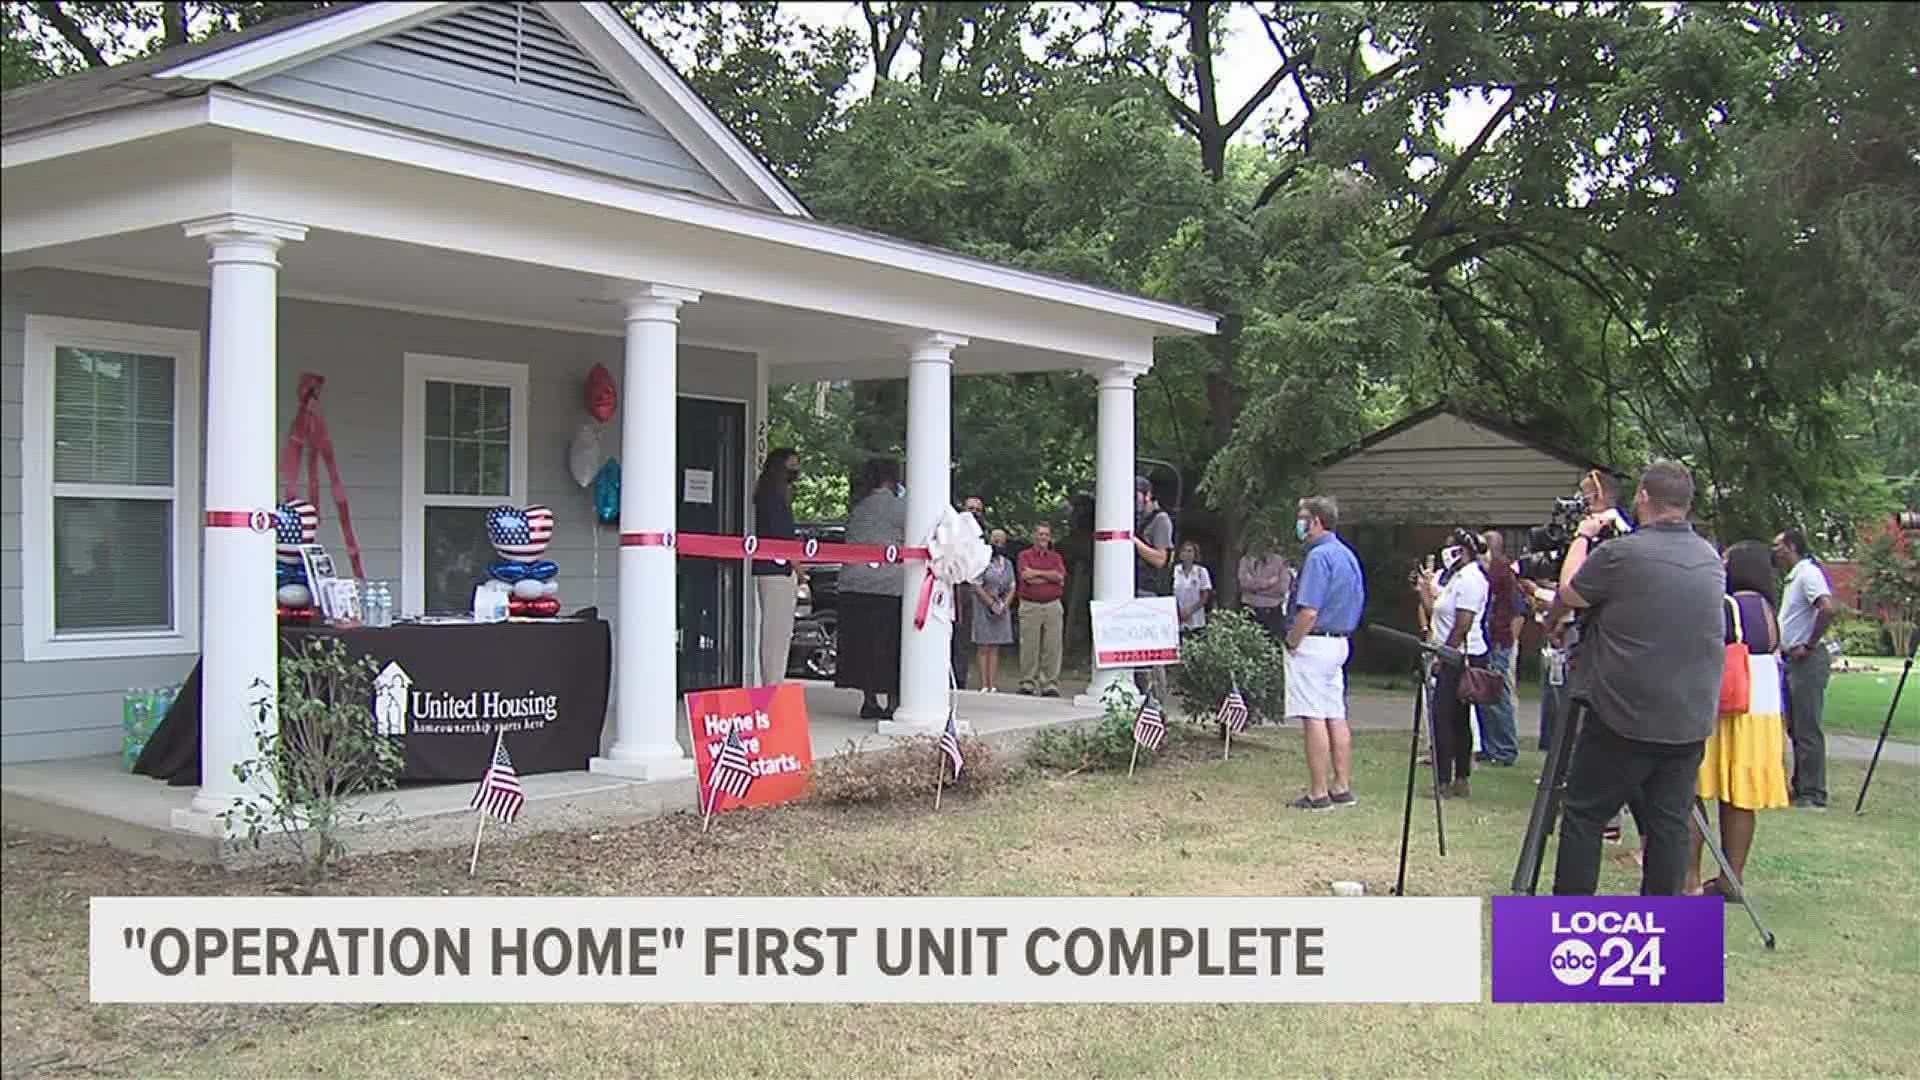 'Operation Home' is a partnership with Neighborhood Christian Center and United Housing.